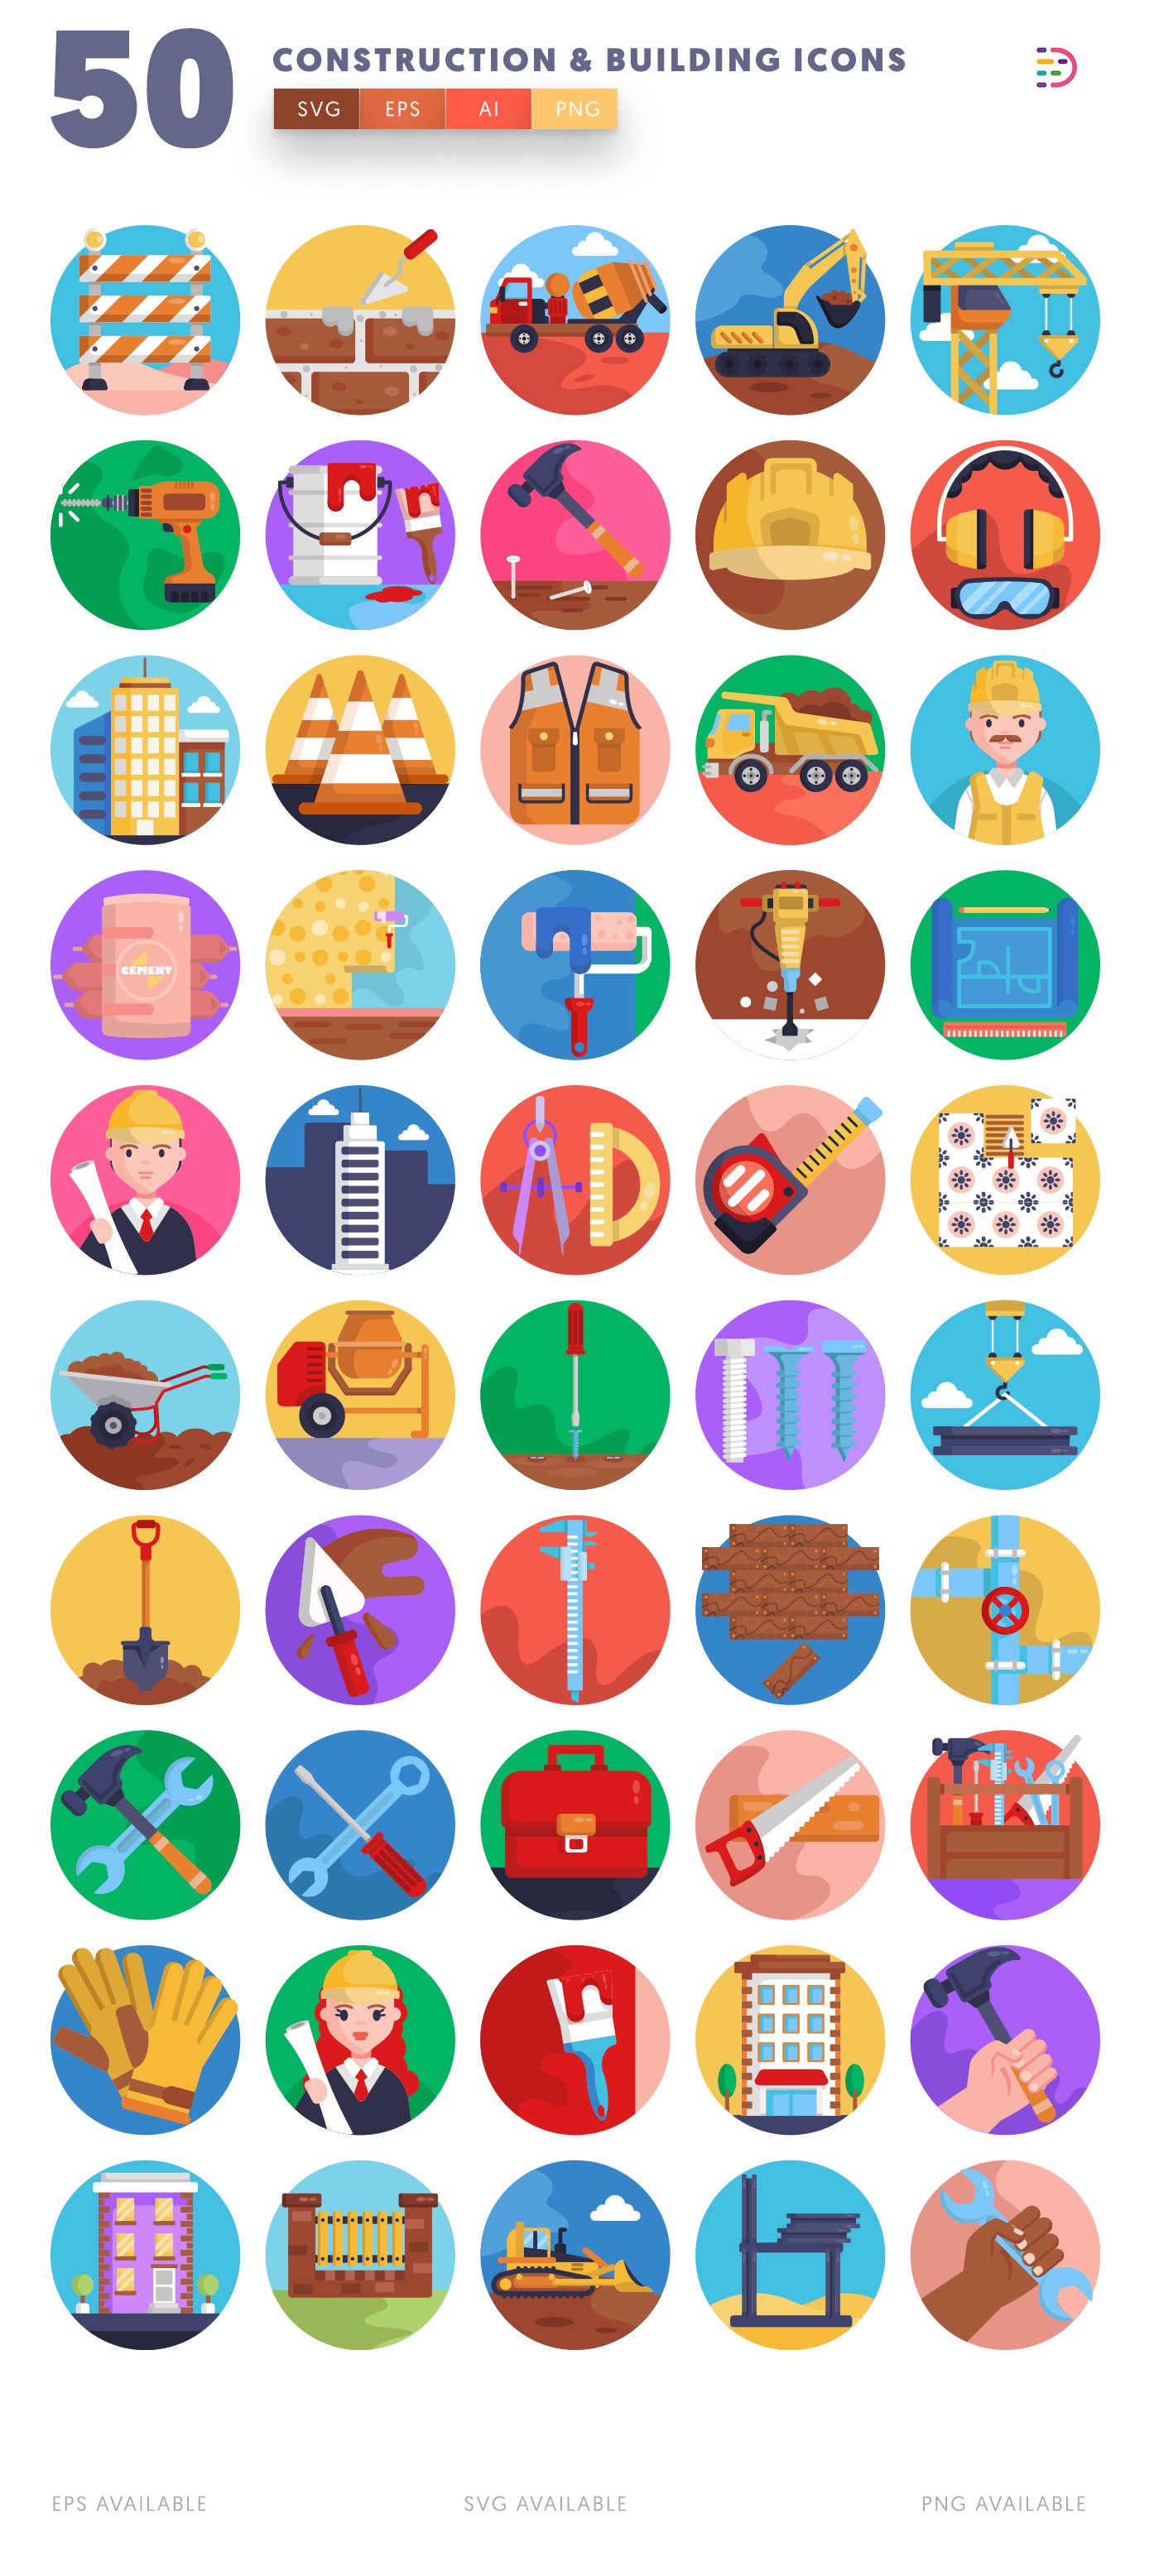 Construction and Building icon pack